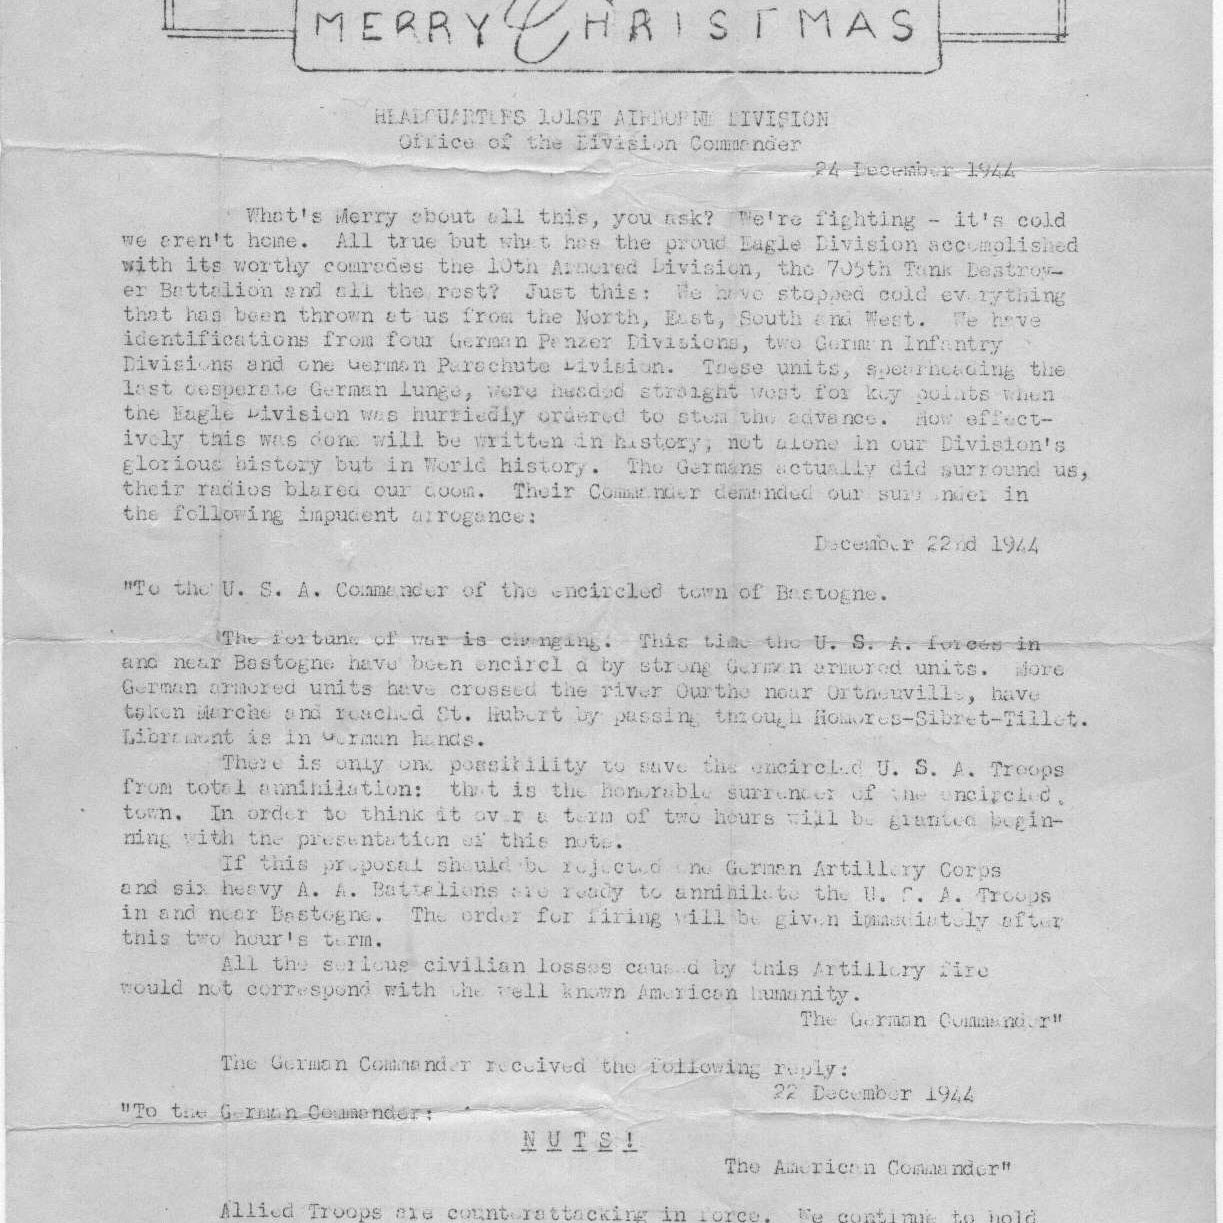 A letter from General McAuliffe on Christmas Day to the 101st Airborne troops defending Bastogne.